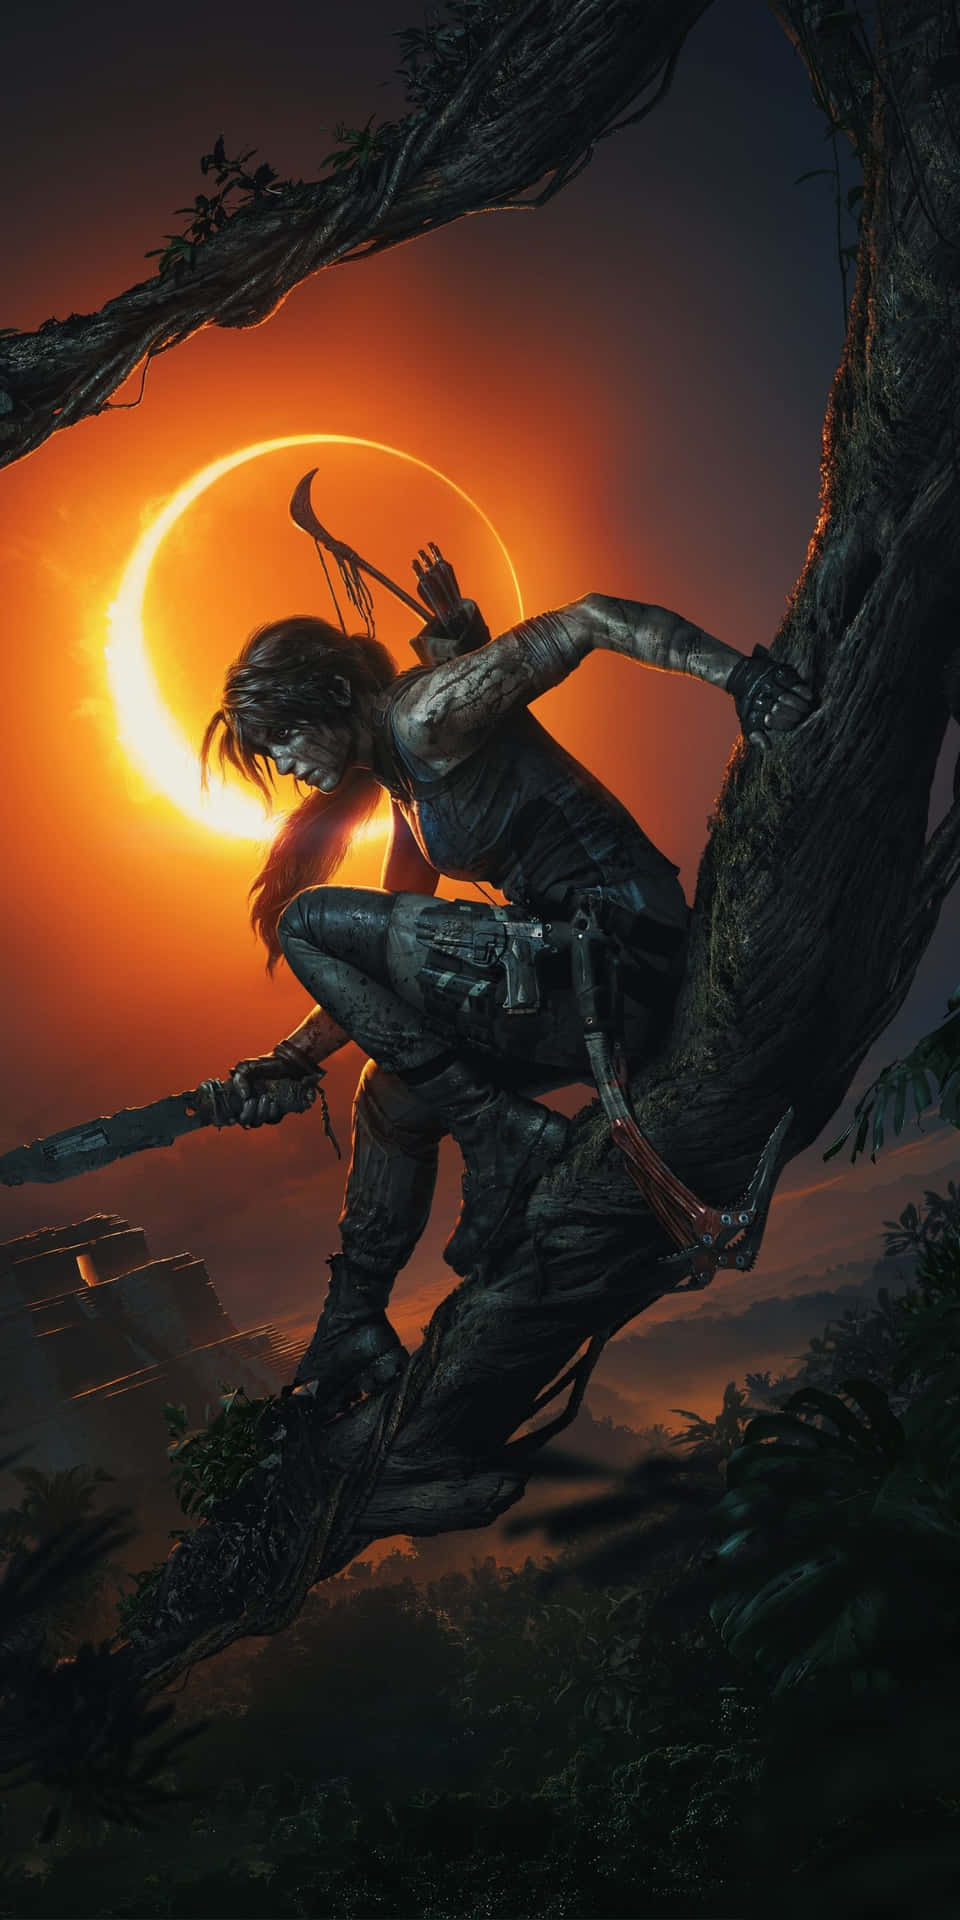 Uncover the Secrets of the World With the Tomb Raider Phone Wallpaper